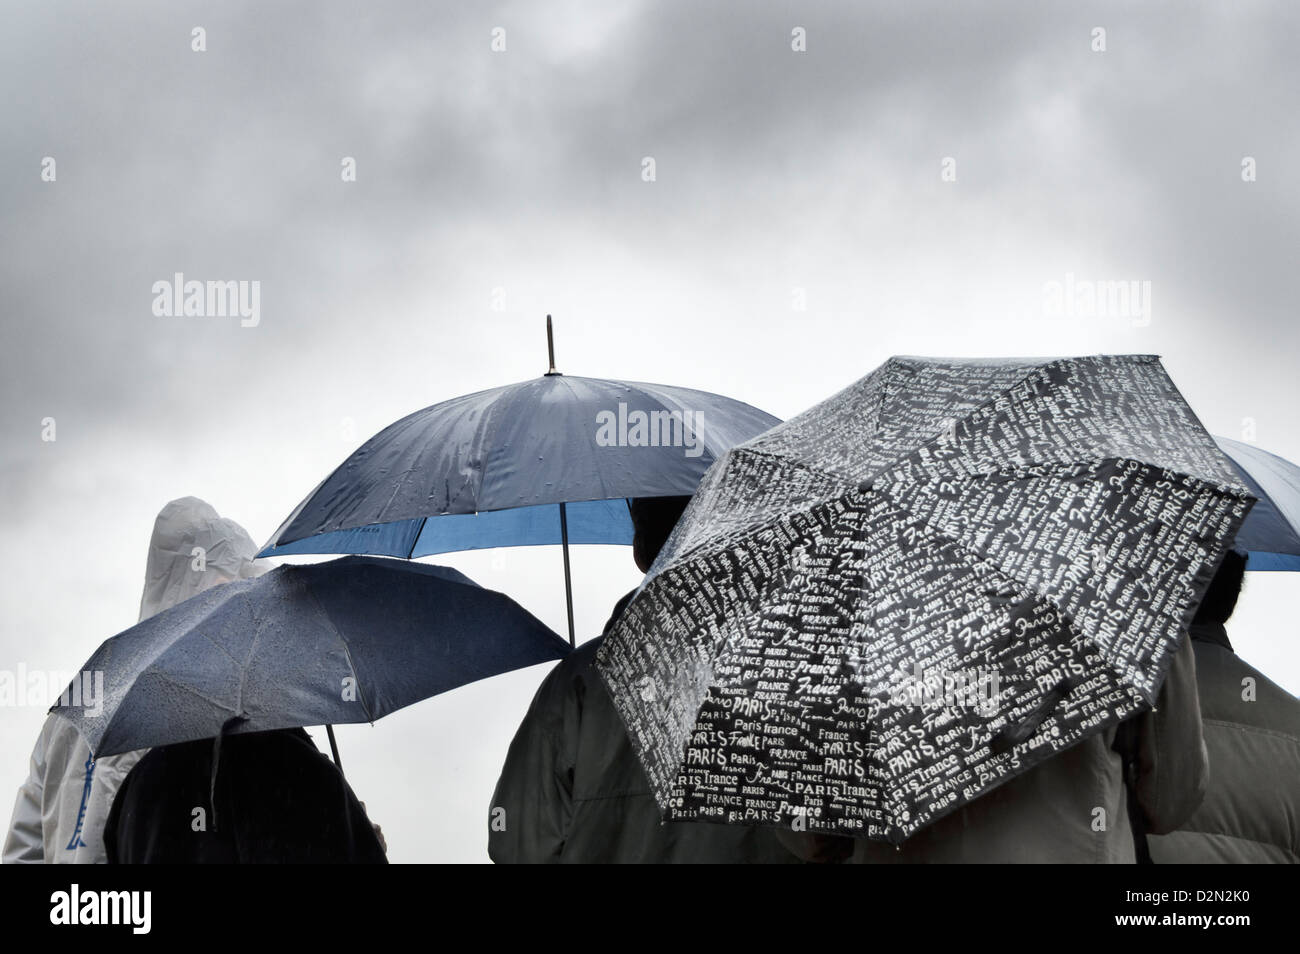 A group of people sheltering from the rain under umbrellas in Paris Stock Photo